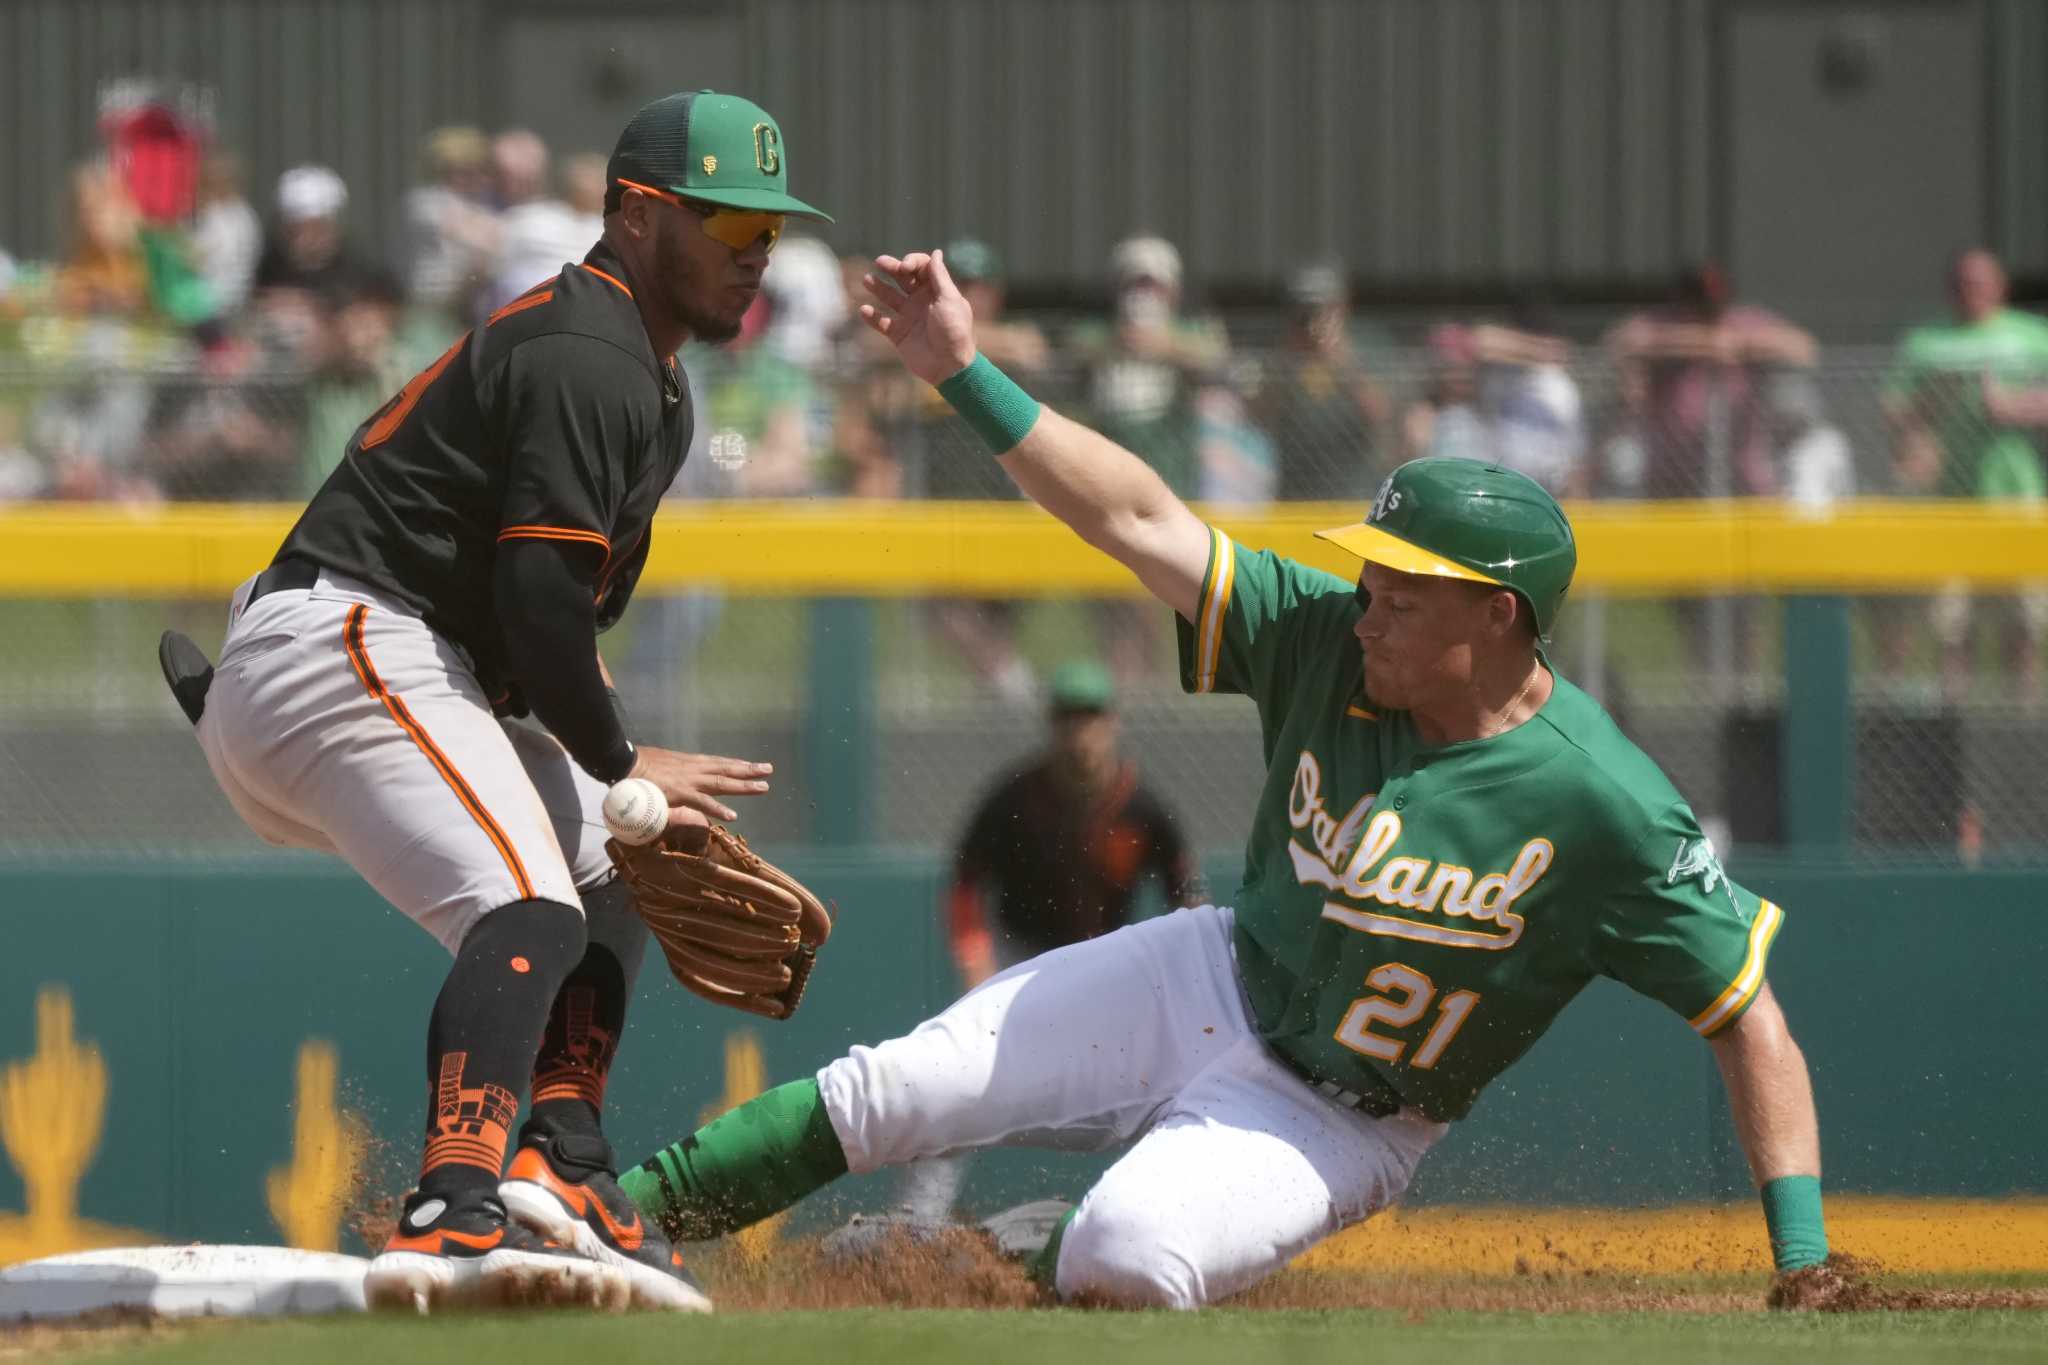 SF Giants: New MLB options rule has impacts on roster planning